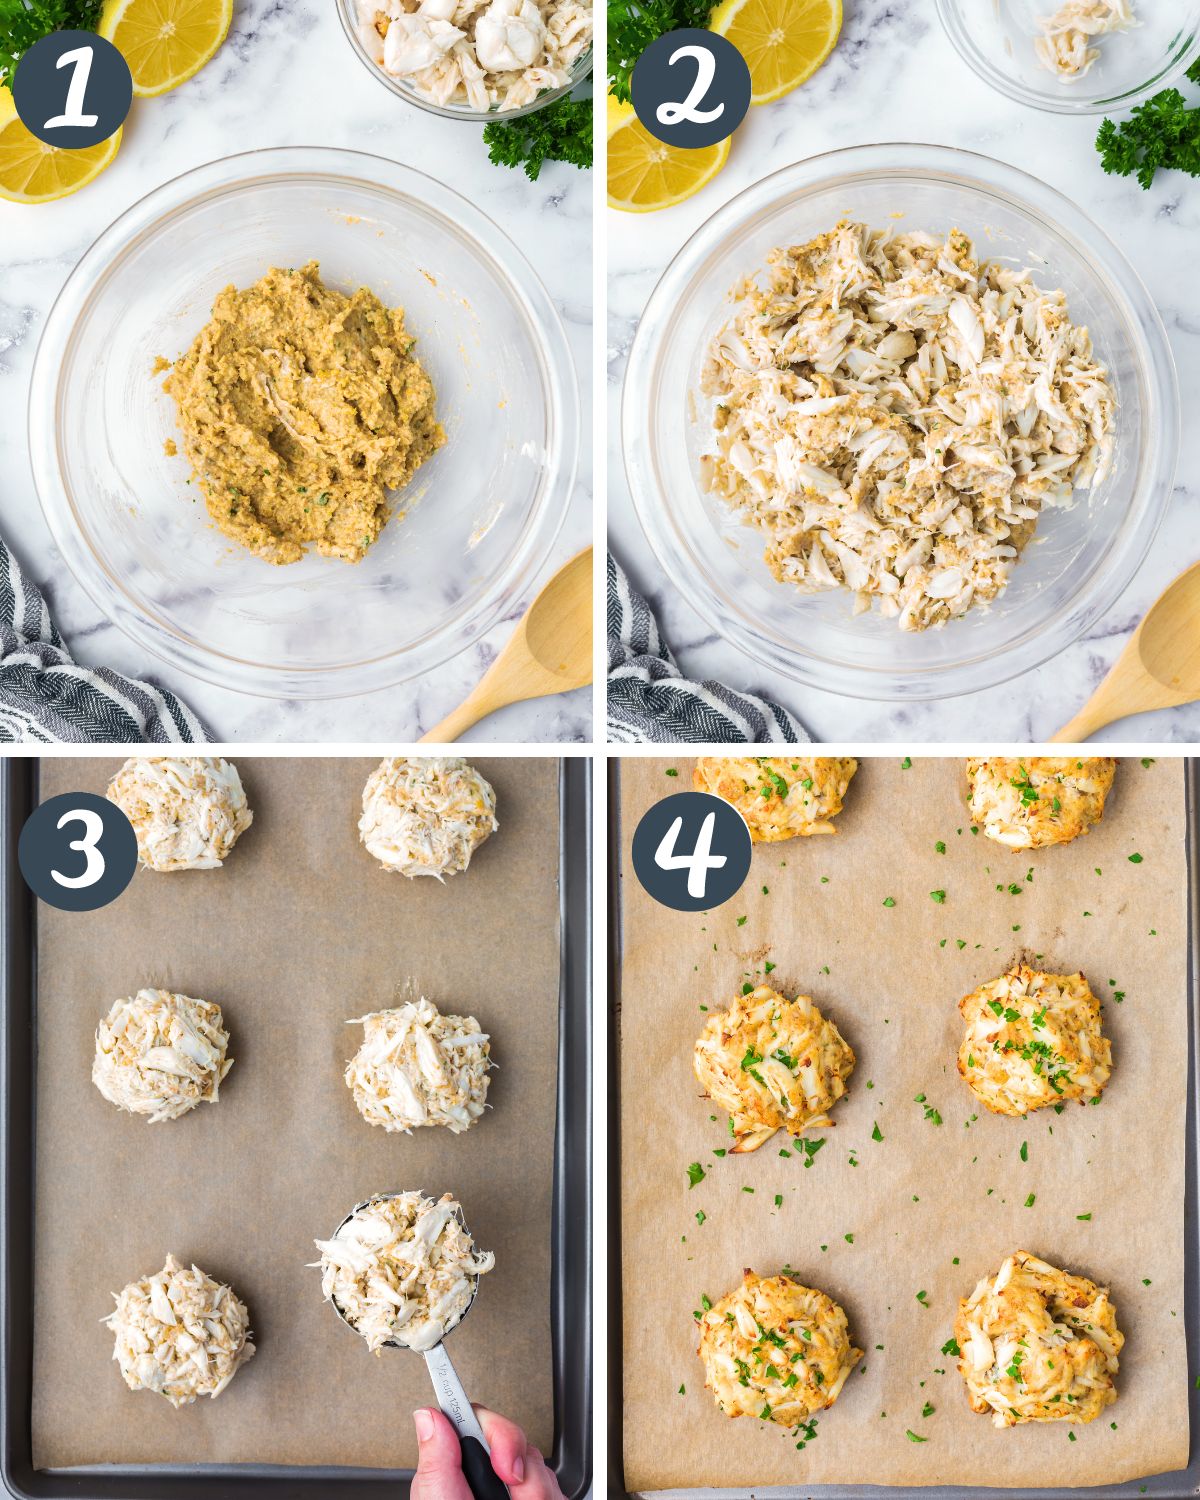 4 images showing the steps for making crab cakes: filler mixed in bowl, crab added, formed in measuring cup, and baked on sheet.